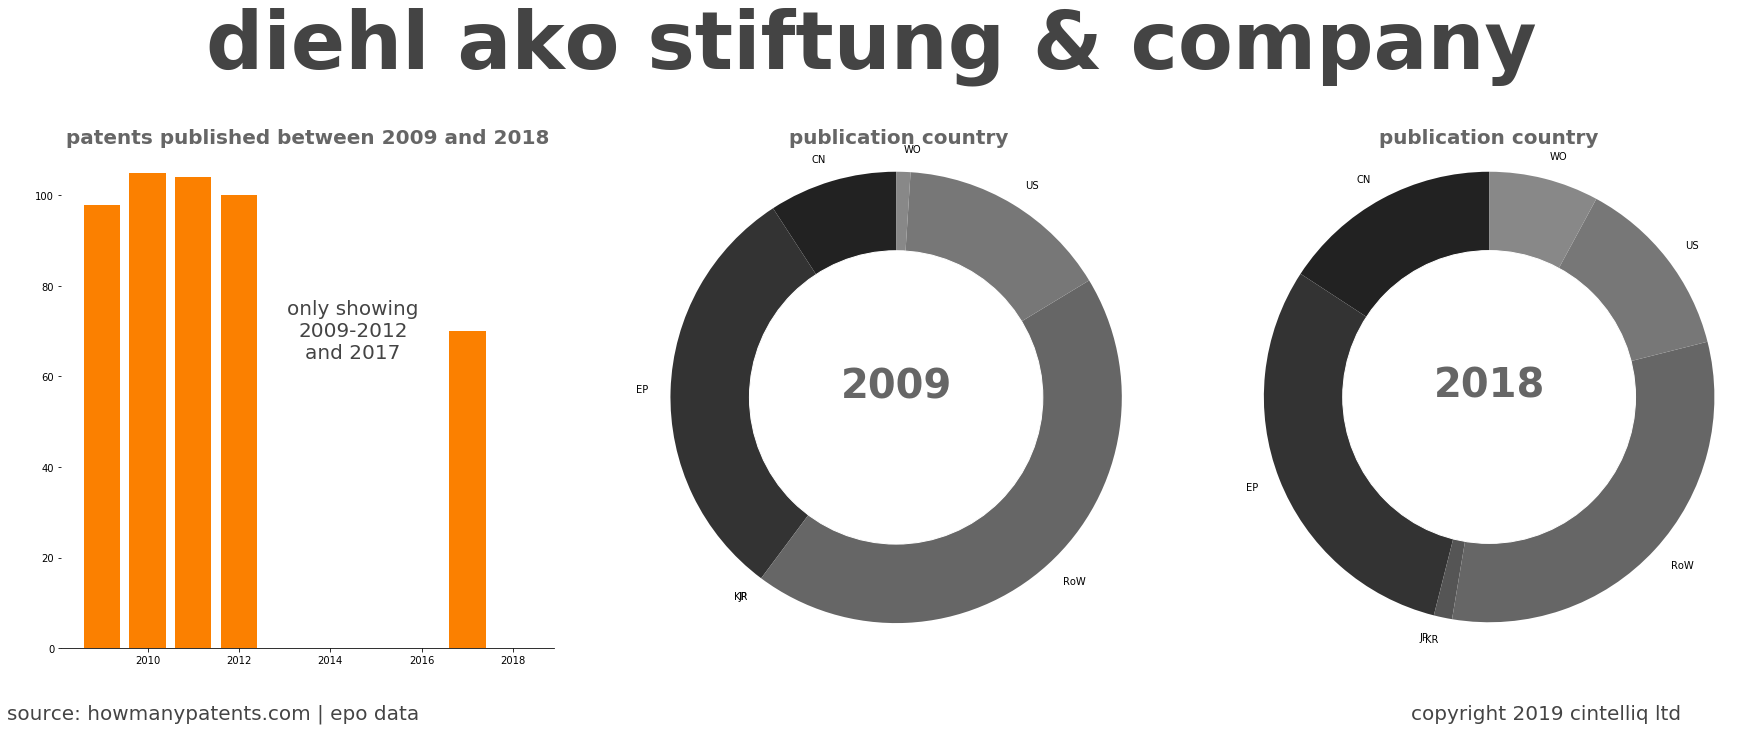 summary of patents for Diehl Ako Stiftung & Company